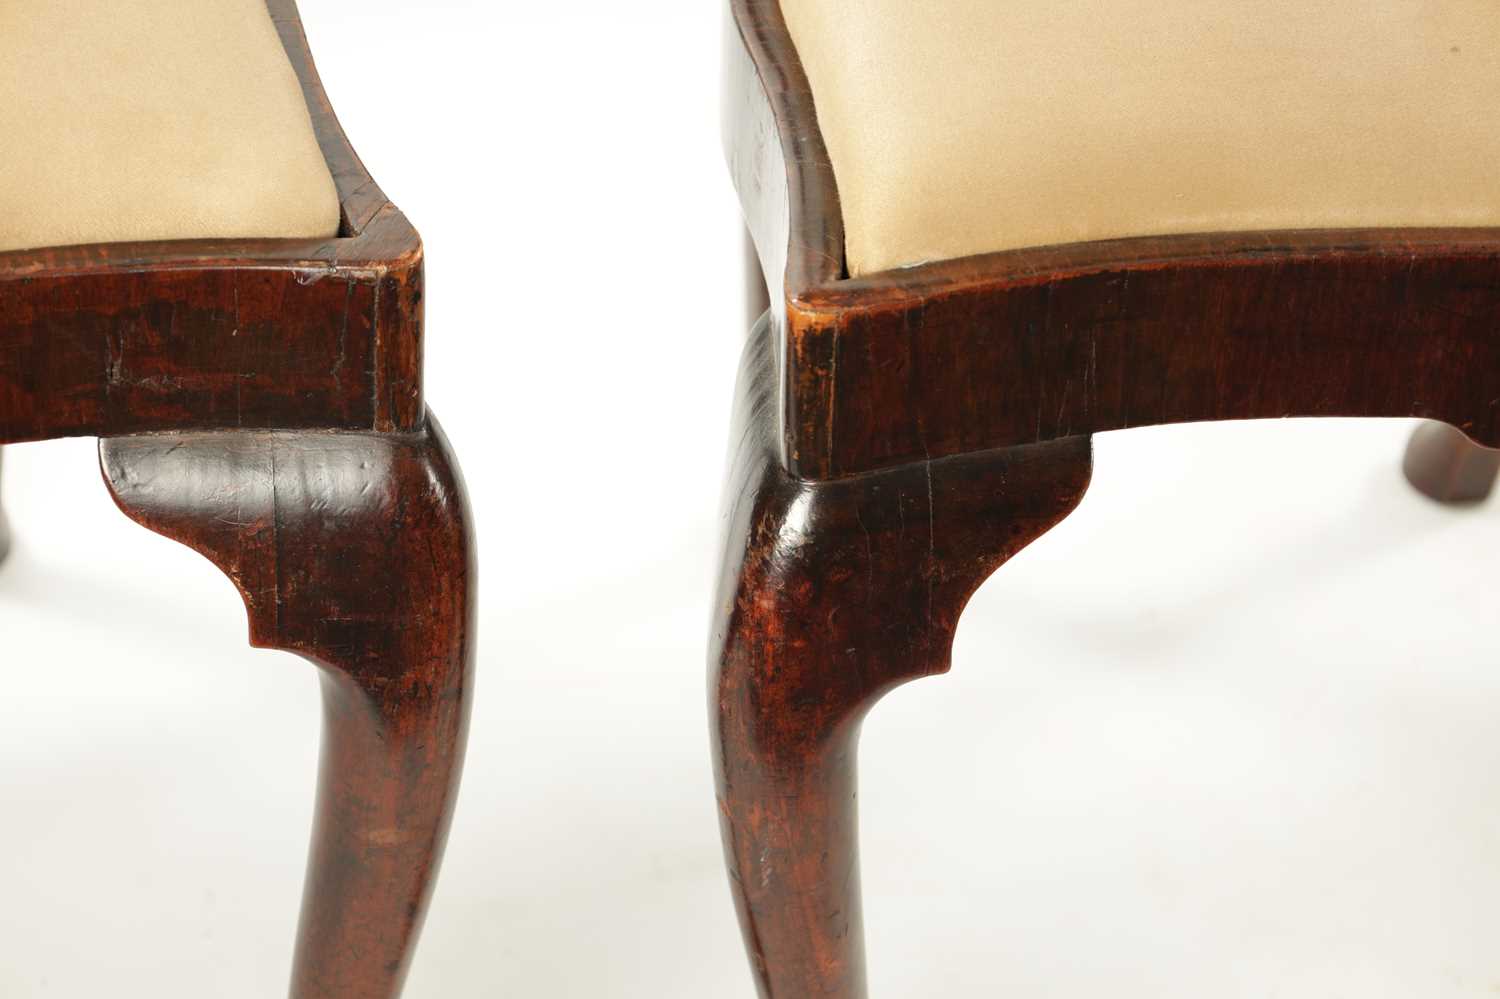 A RARE SET OF FOUR MID 18TH CENTURY OAK AND WALNUT VENEERED IRISH DINING CHAIRS WITH UNUSUAL ROCOCO - Image 3 of 7